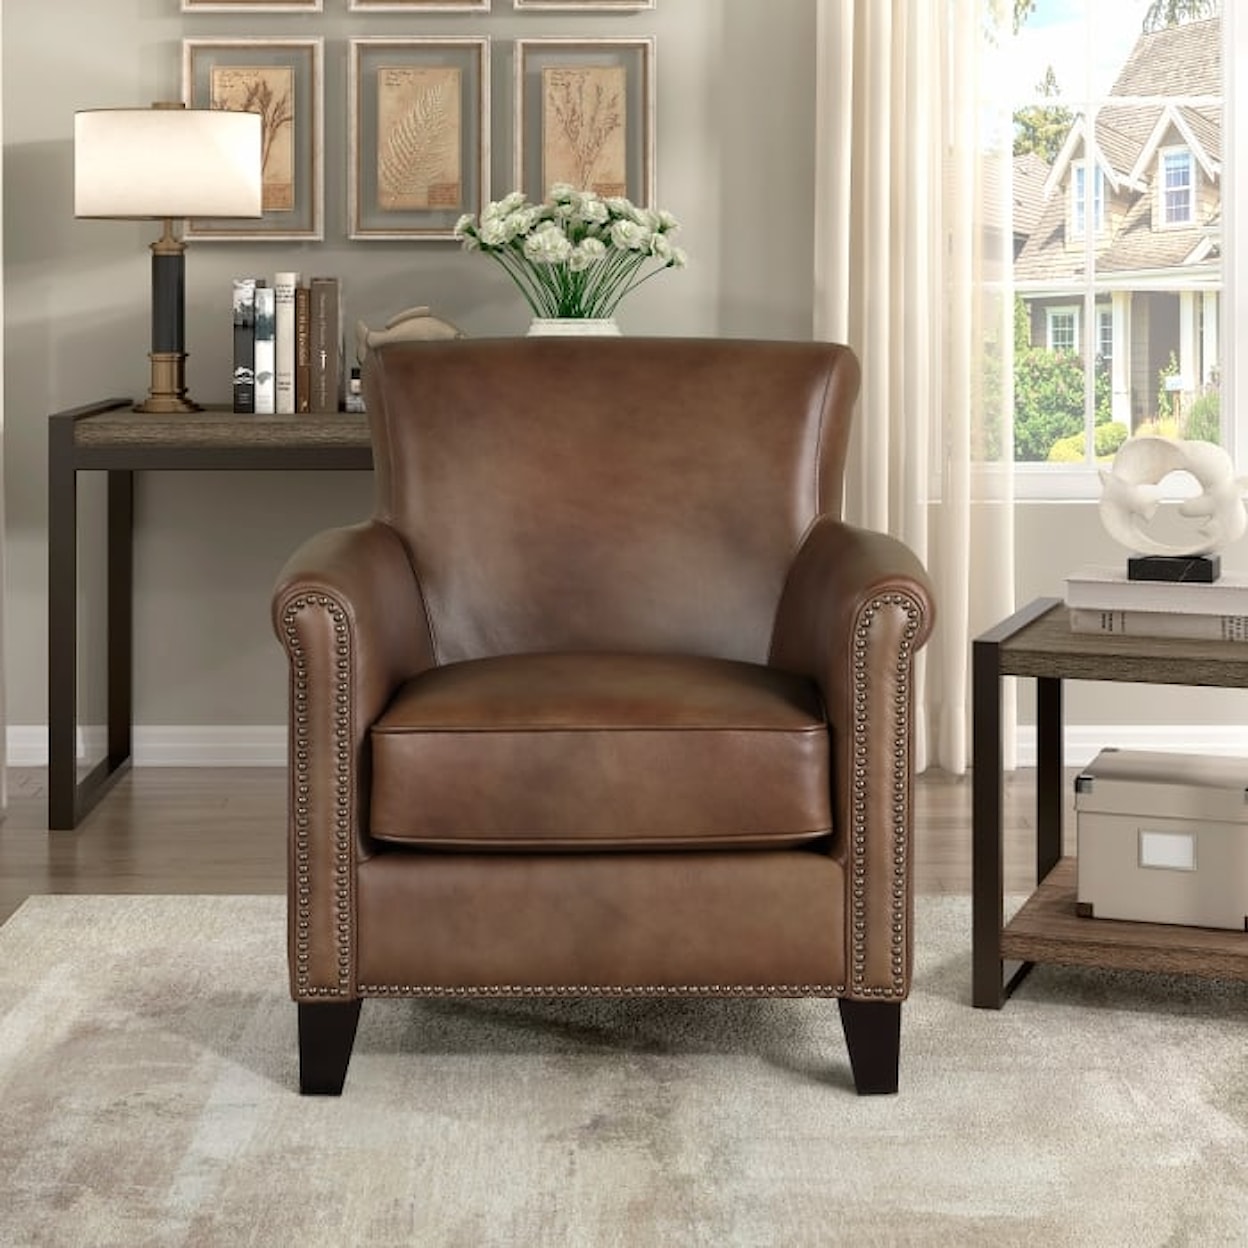 Homelegance Braintree Accent Chair